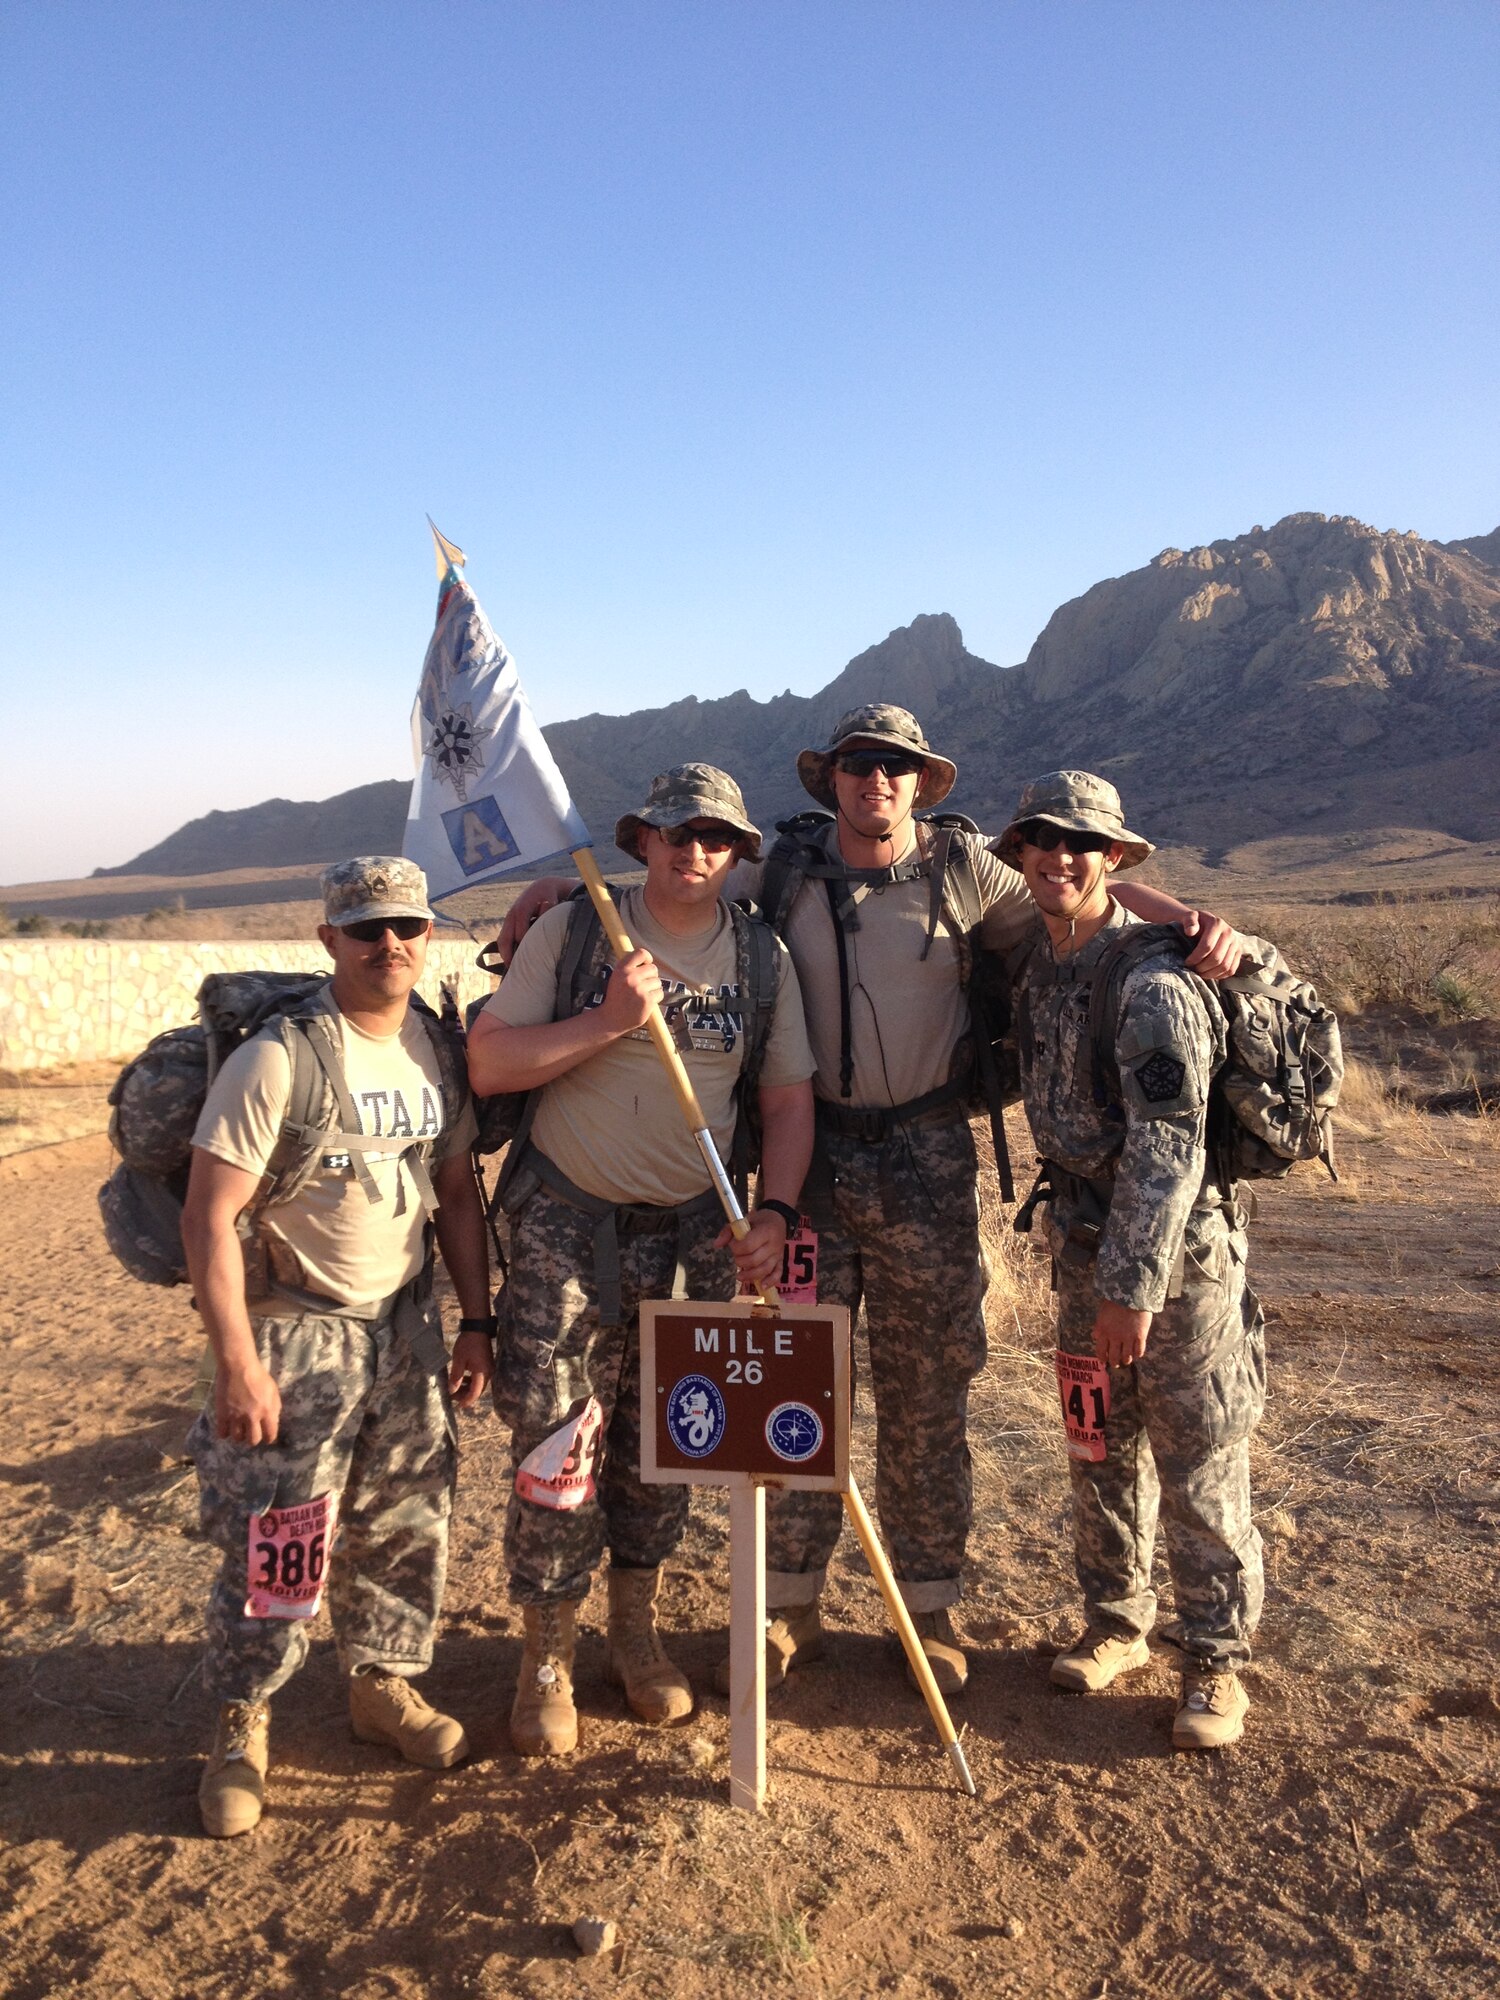 Capt. William Denn III, commander of Alpha Company, 743rd Military Intelligence Battalion, 704th MI Brigade, right, poses with his team during the 2013 Bataan Memorial Death March while deployed. Denn is the recipient of the General MacArthur Leadership Award. (U.S. Army courtesy photo)